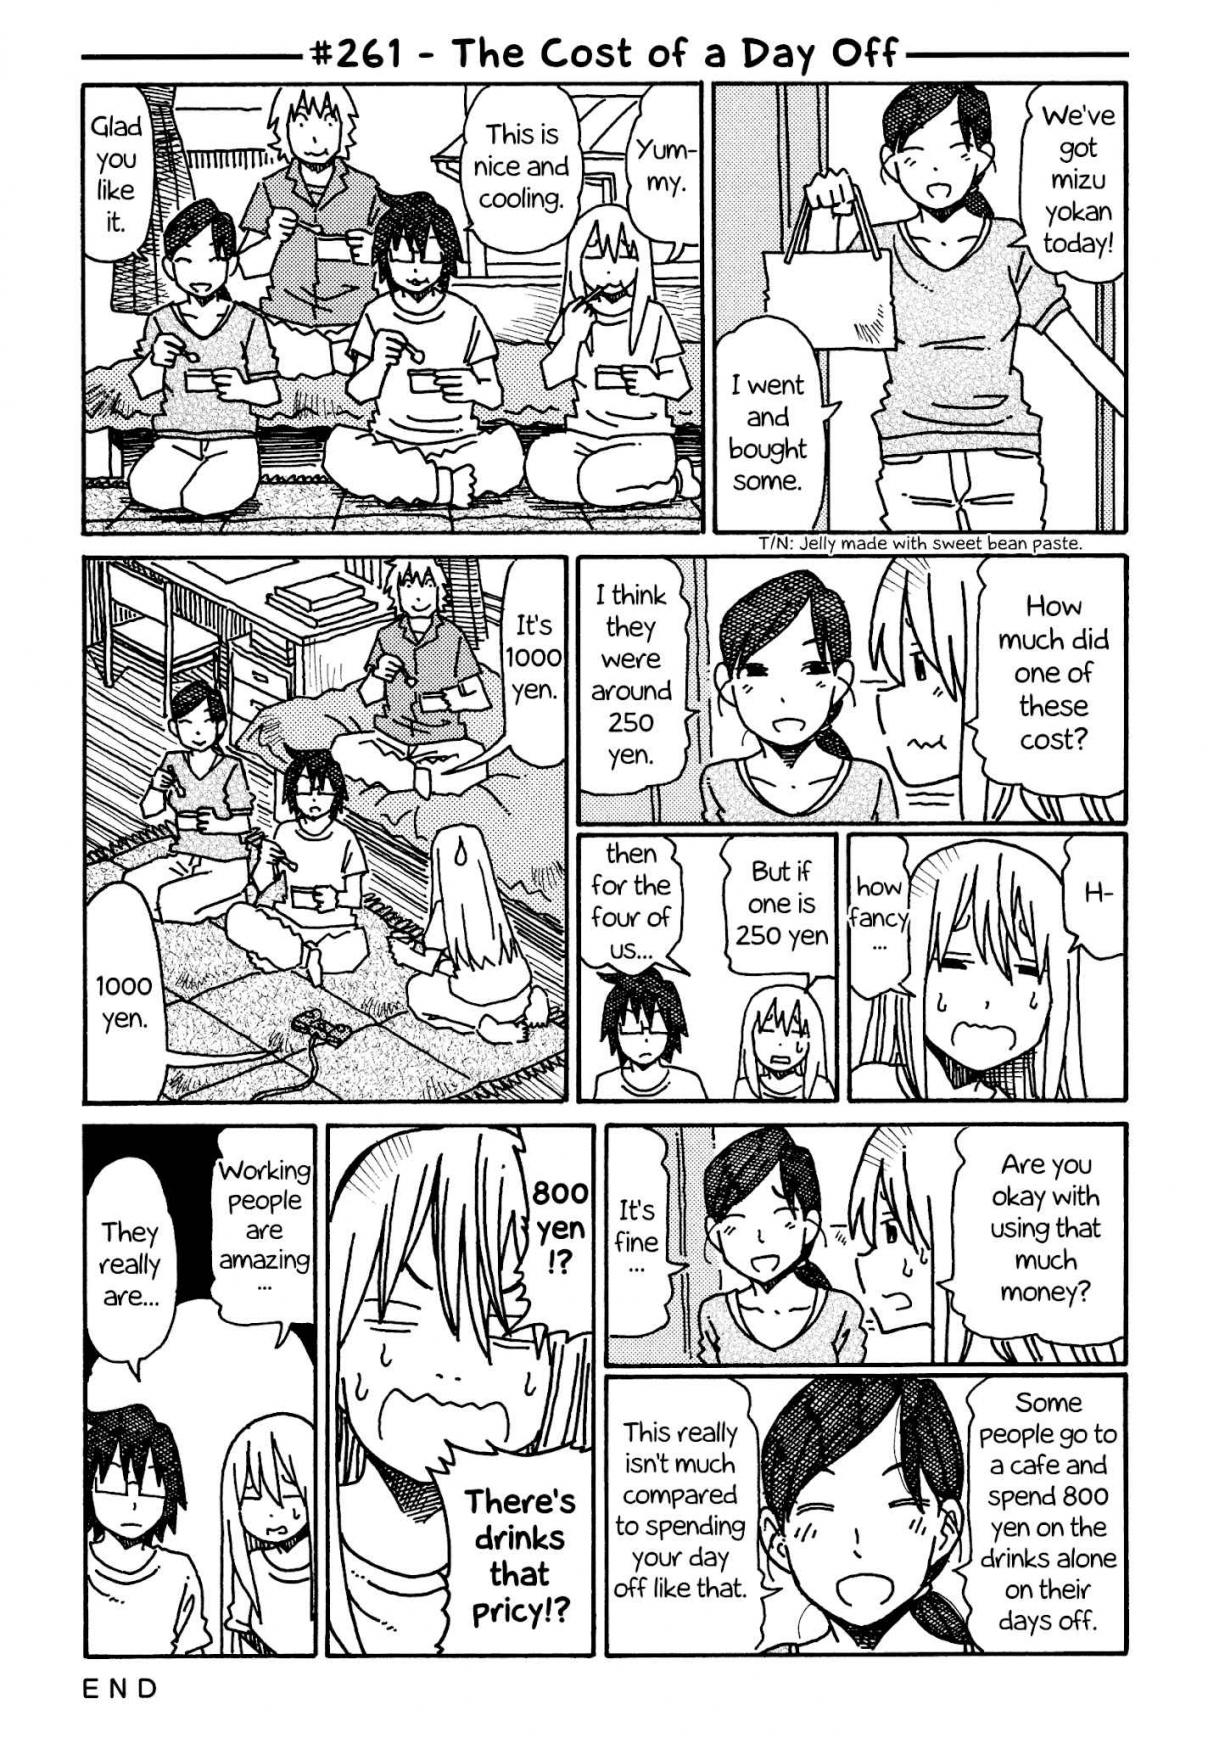 Hatarakanai Futari (The Jobless Siblings) Chapter 261: The Cost Of A Day Off